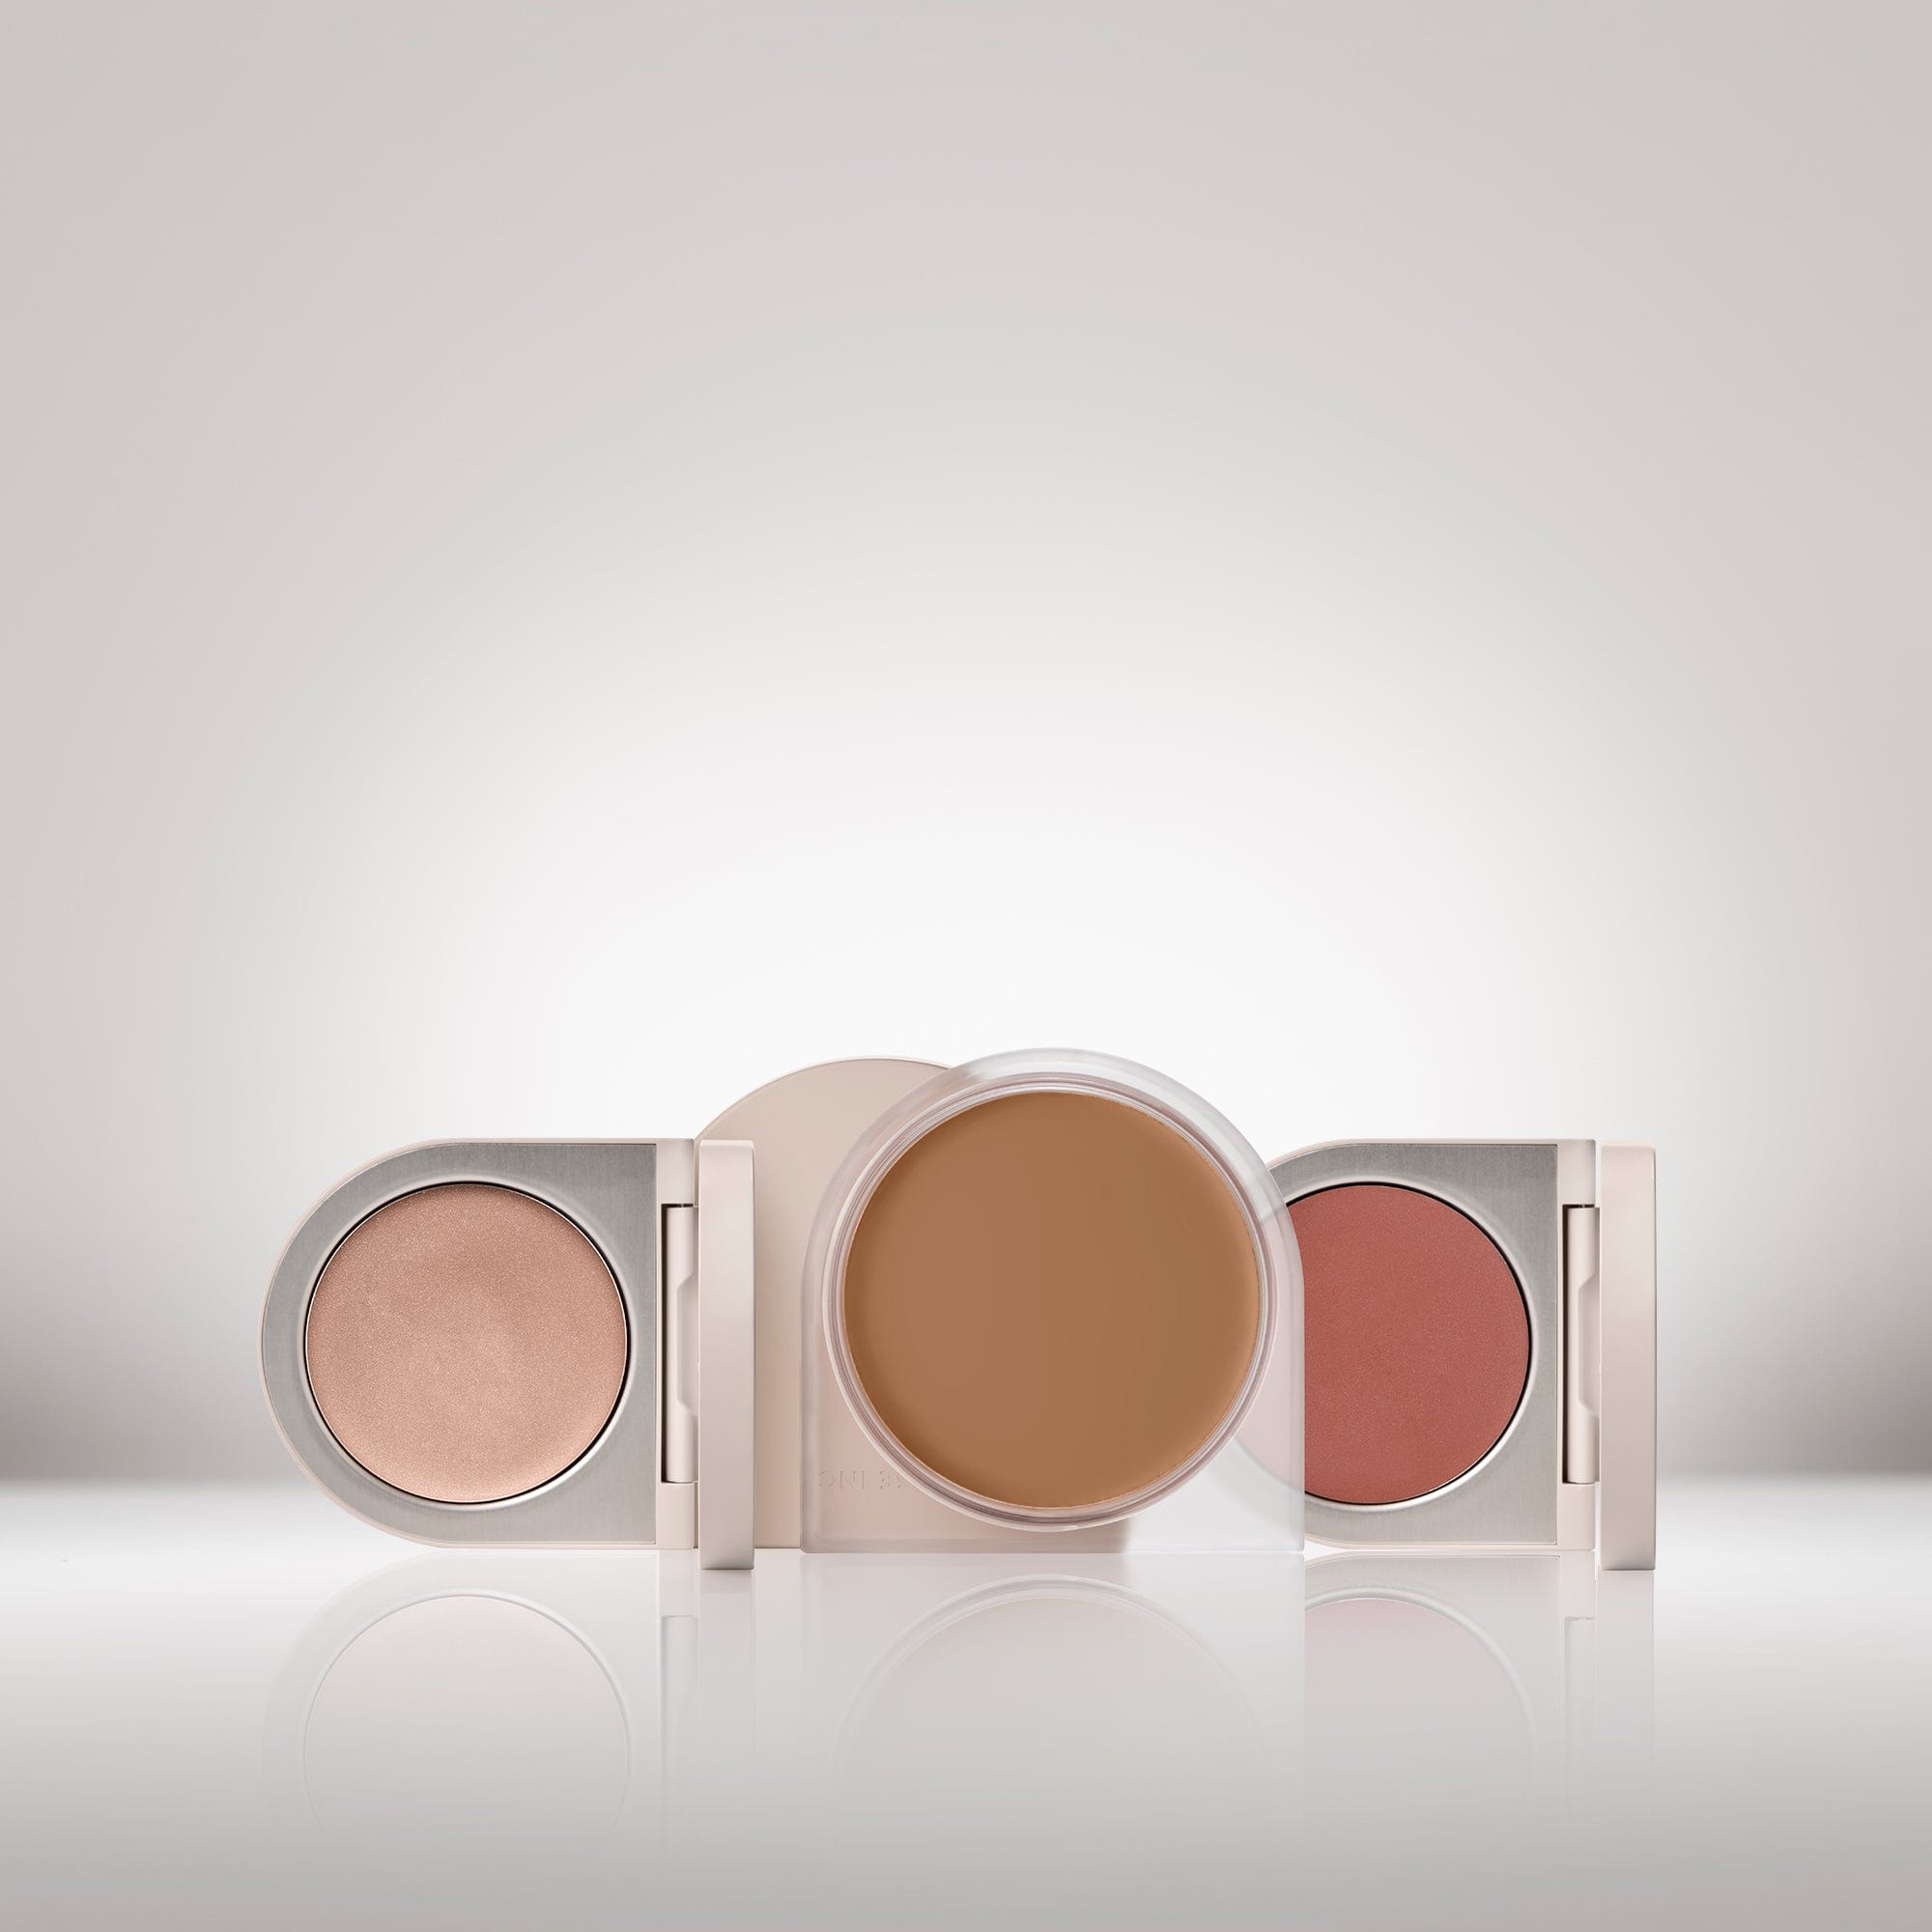 Rose Inc online only exclusive value set featuring the Solar Radiance Highlighter, Solar Infusion Bronzer and the Cream Blush. The easiest way to a natural-looking radiance.